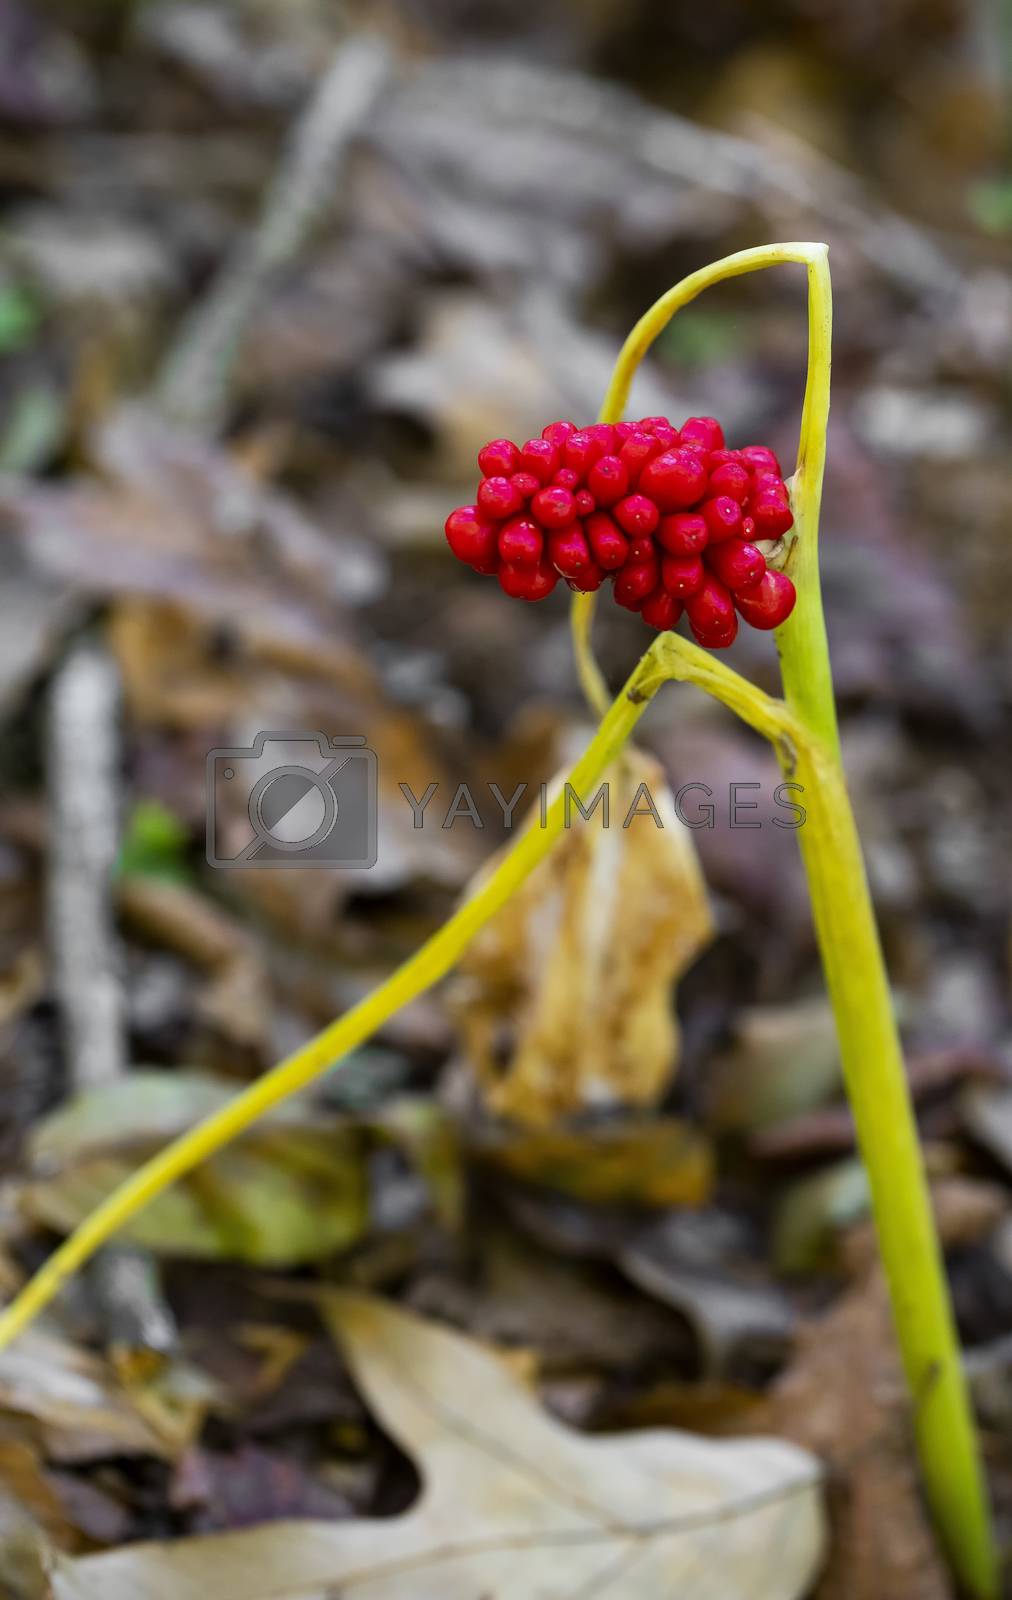 Royalty free image of Ripe Seeds on a Green Dragon Wildflower by CharlieFloyd